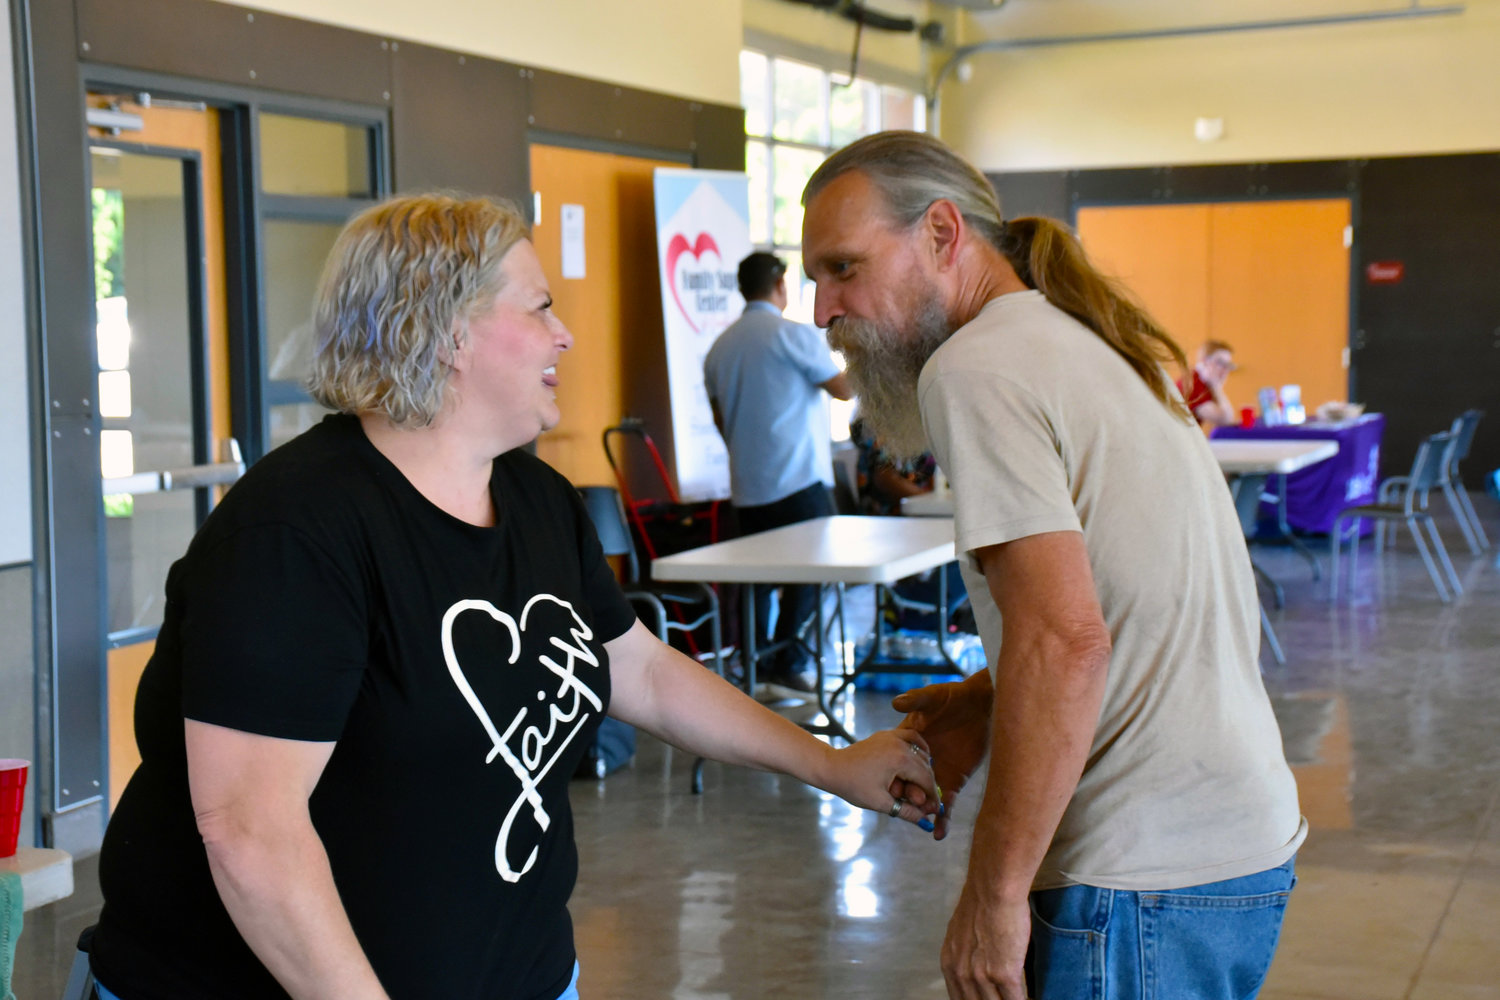 Yelm resident Sherry Short greets a friends at the Yelm Community Resource Fair on July 29 at the Yelm Community Center.